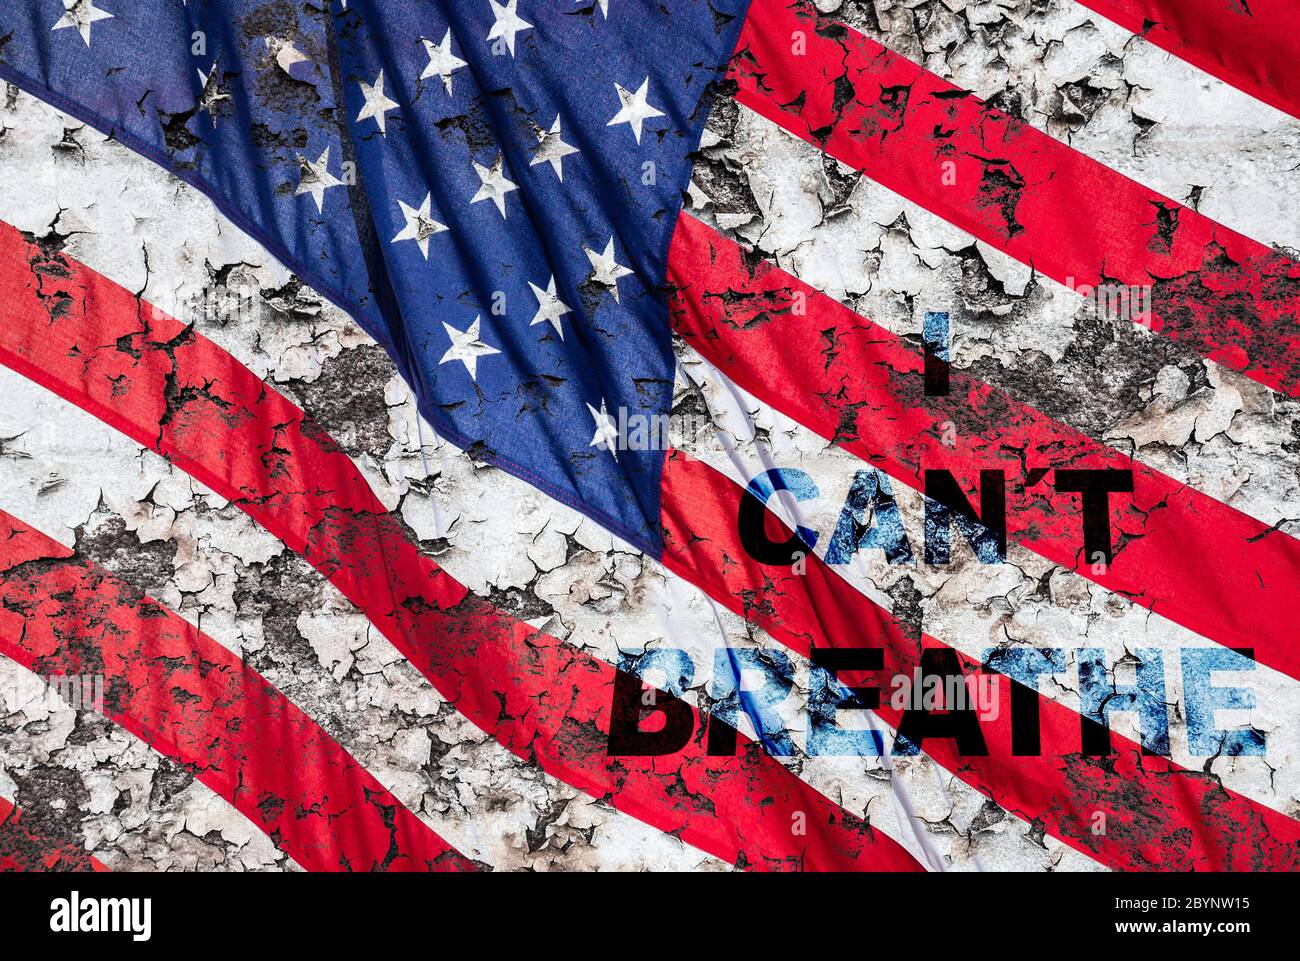 Black lives matter, I can't breathe concept image. Stars and Stripes flag. Stock Photo